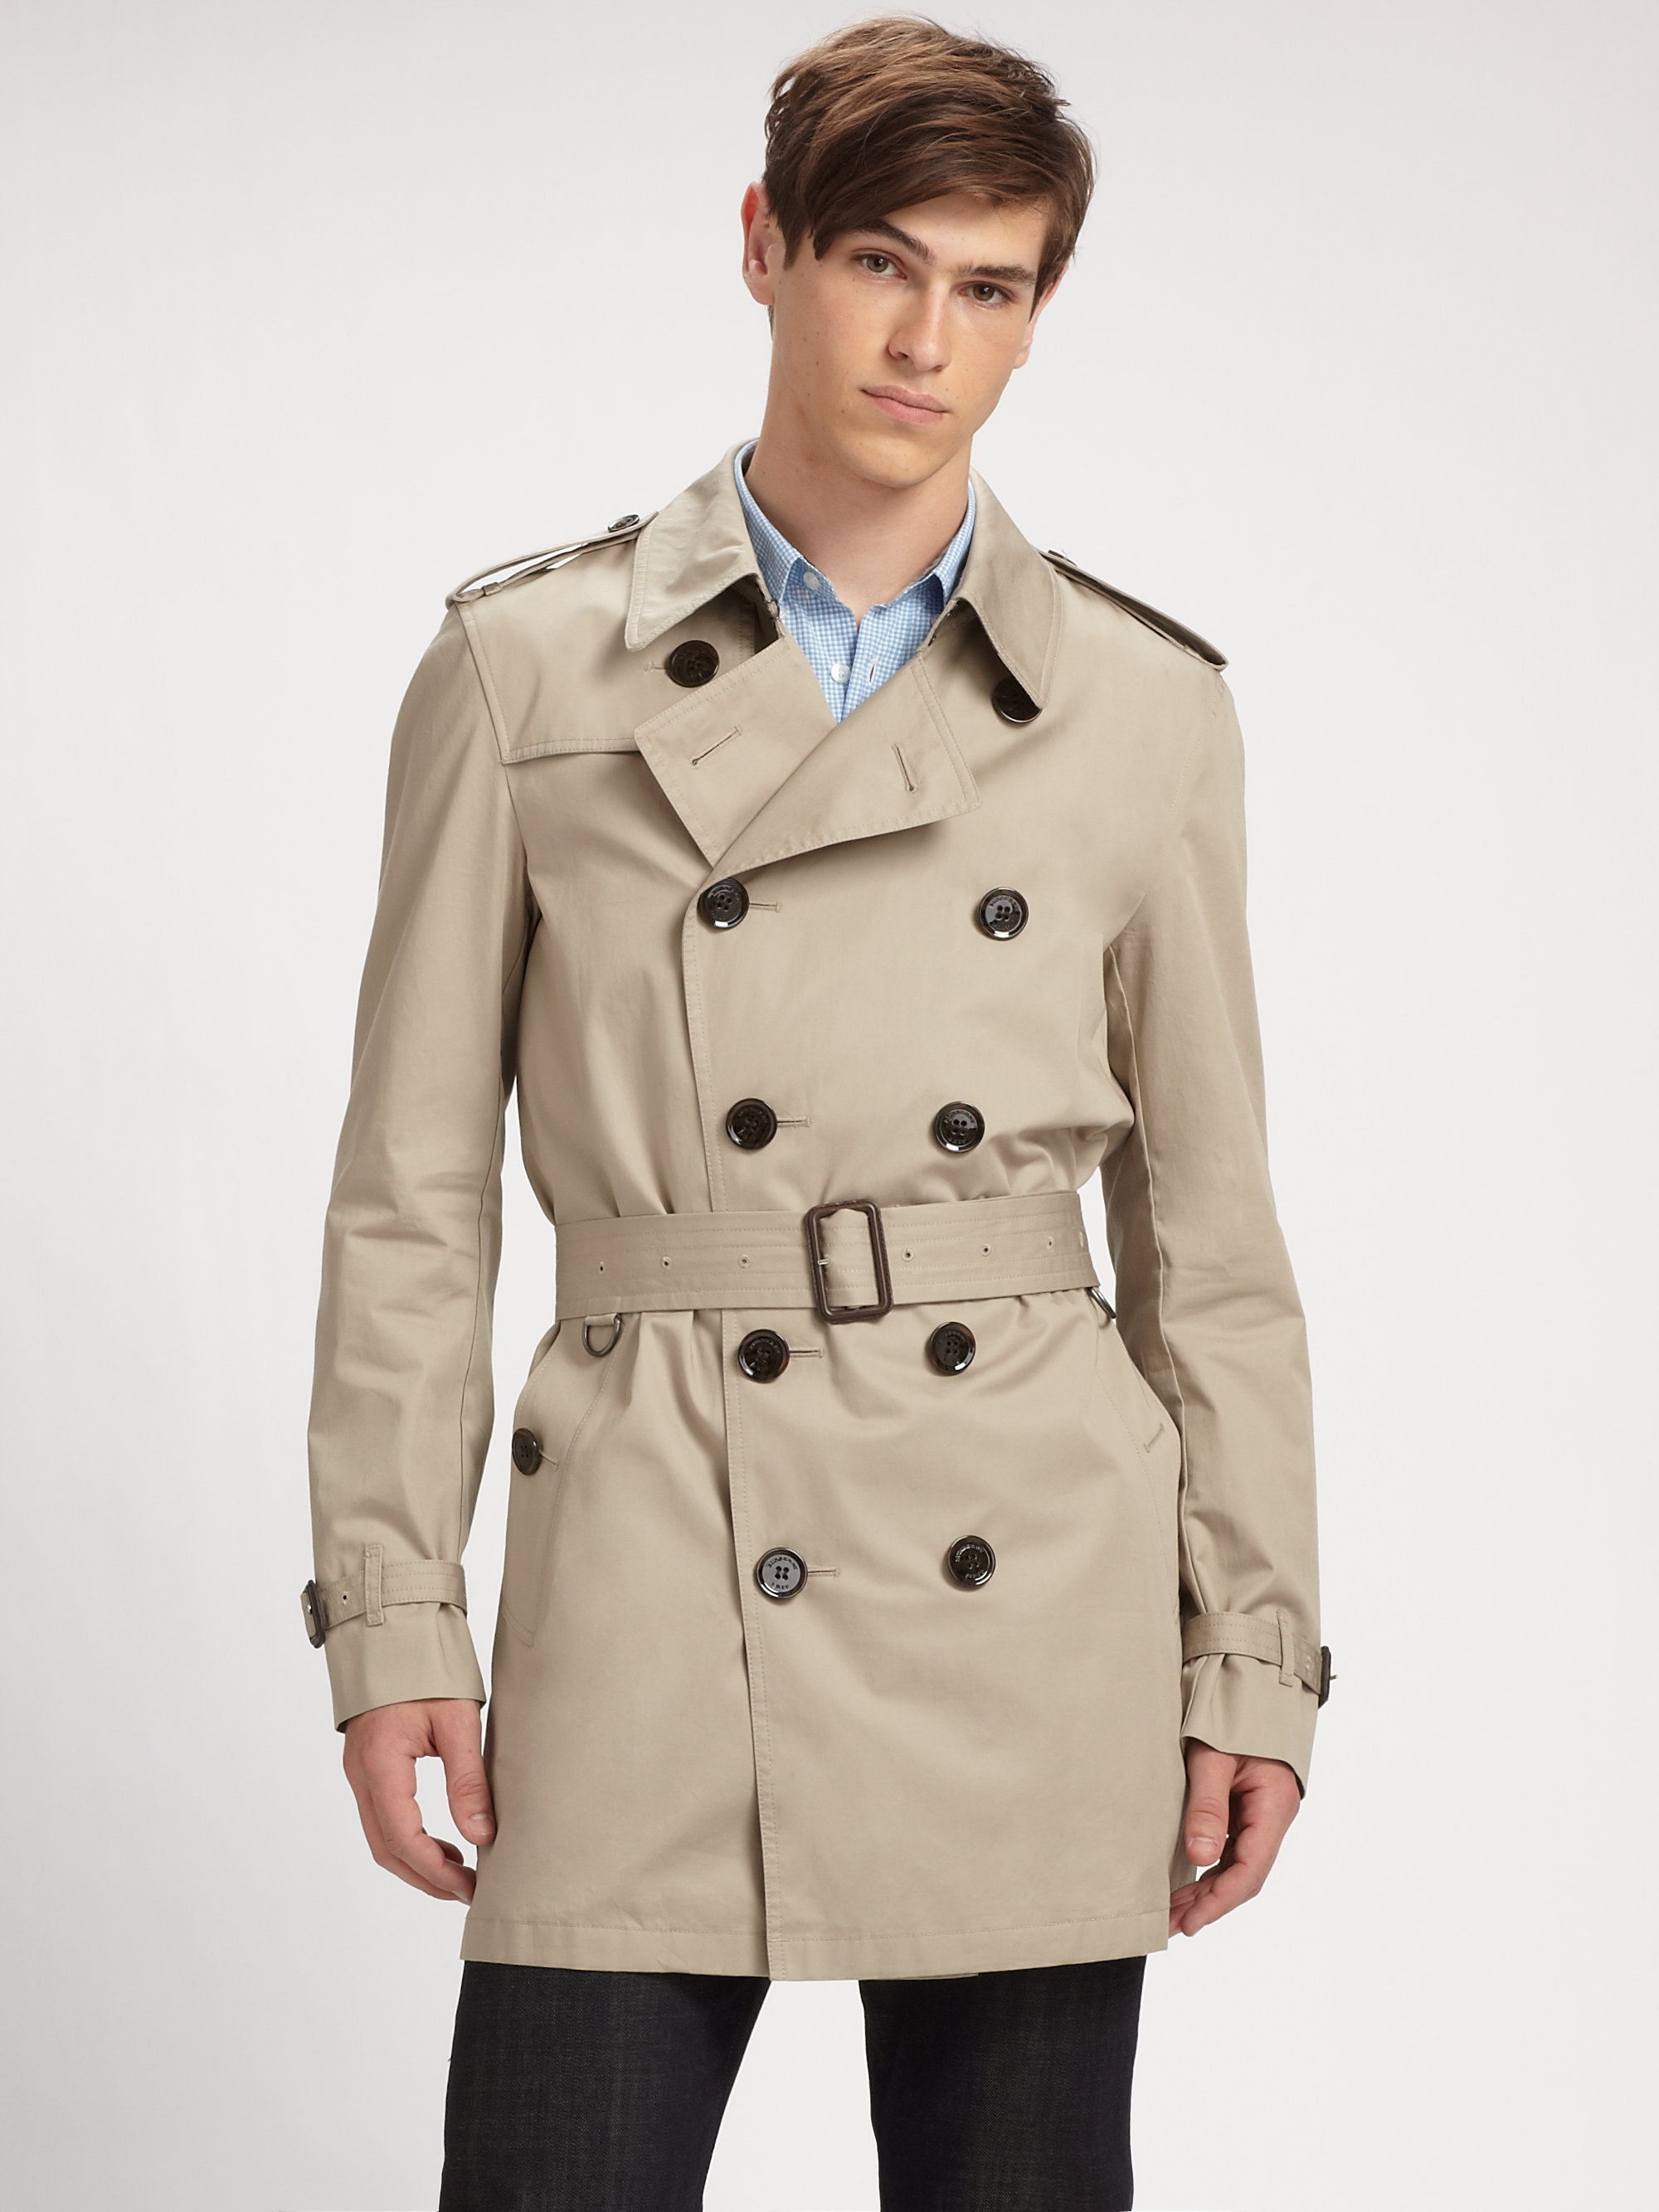 Burberry Brit Trench Coat Mens Online, SAVE 46% - mpgc.net